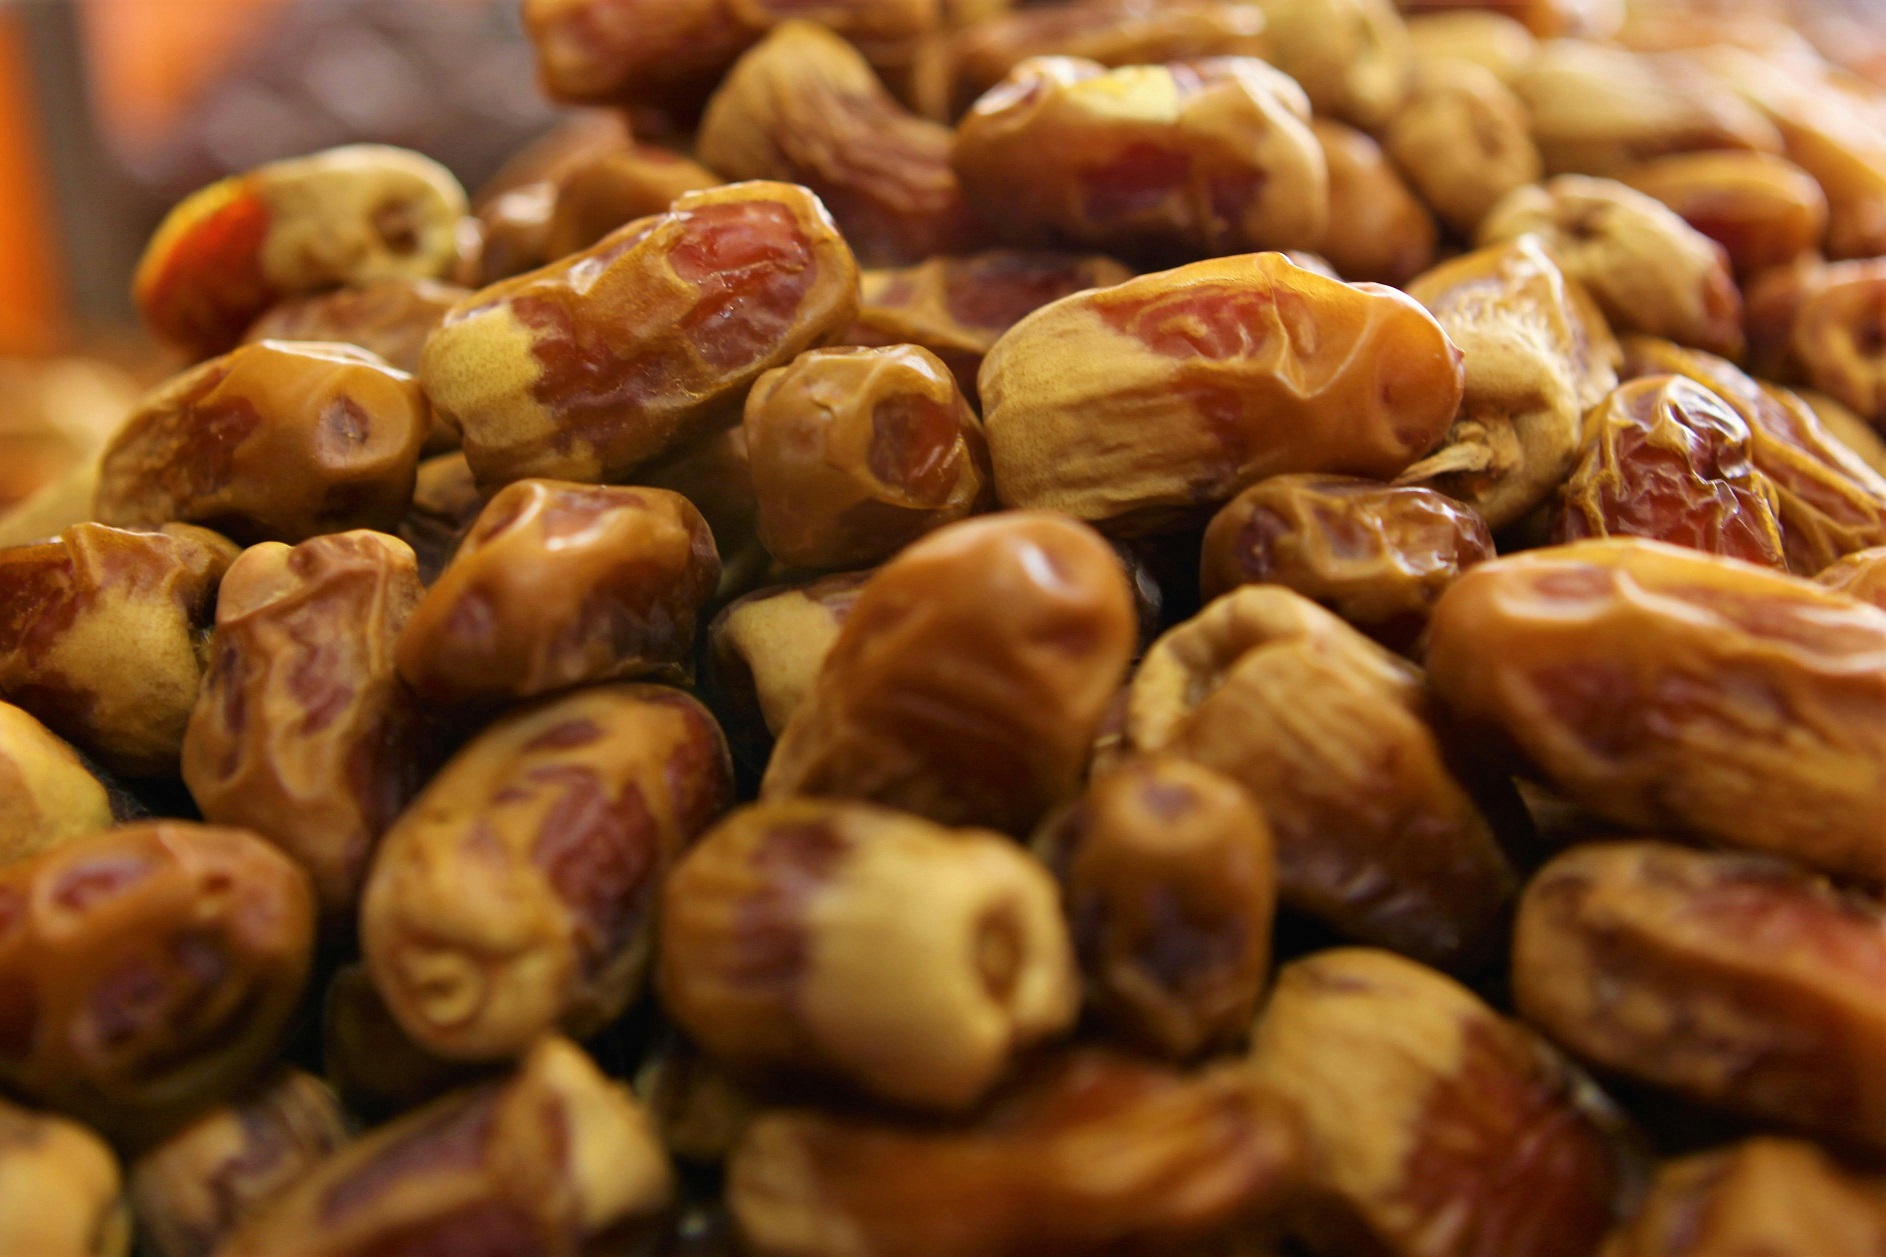 Where to Find Dates in the Grocery Store